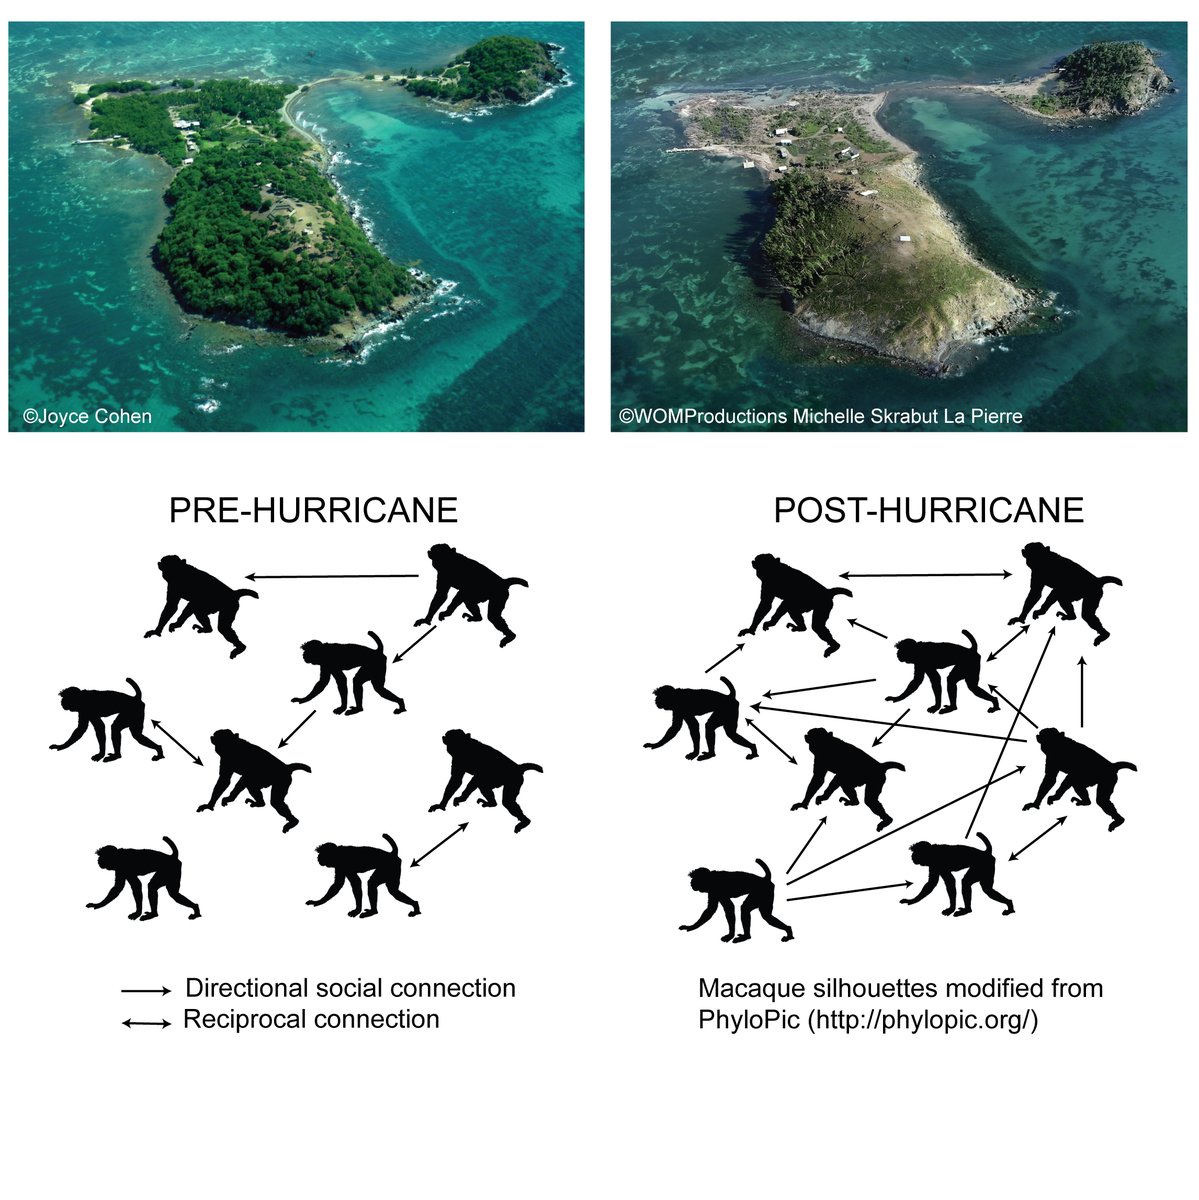 Excited to share our new paper out today in  @CurrentBiology!We explore how Cayo Santiago monkeys changed their social dynamics in the aftermath of Hurricane MariaCoauthored w/  @ljnbrent  @MichaelLouisPl1  @nyuprimatology  @SMack_Lab et. al.  http://bit.ly/3dNkmbE (1/16) 